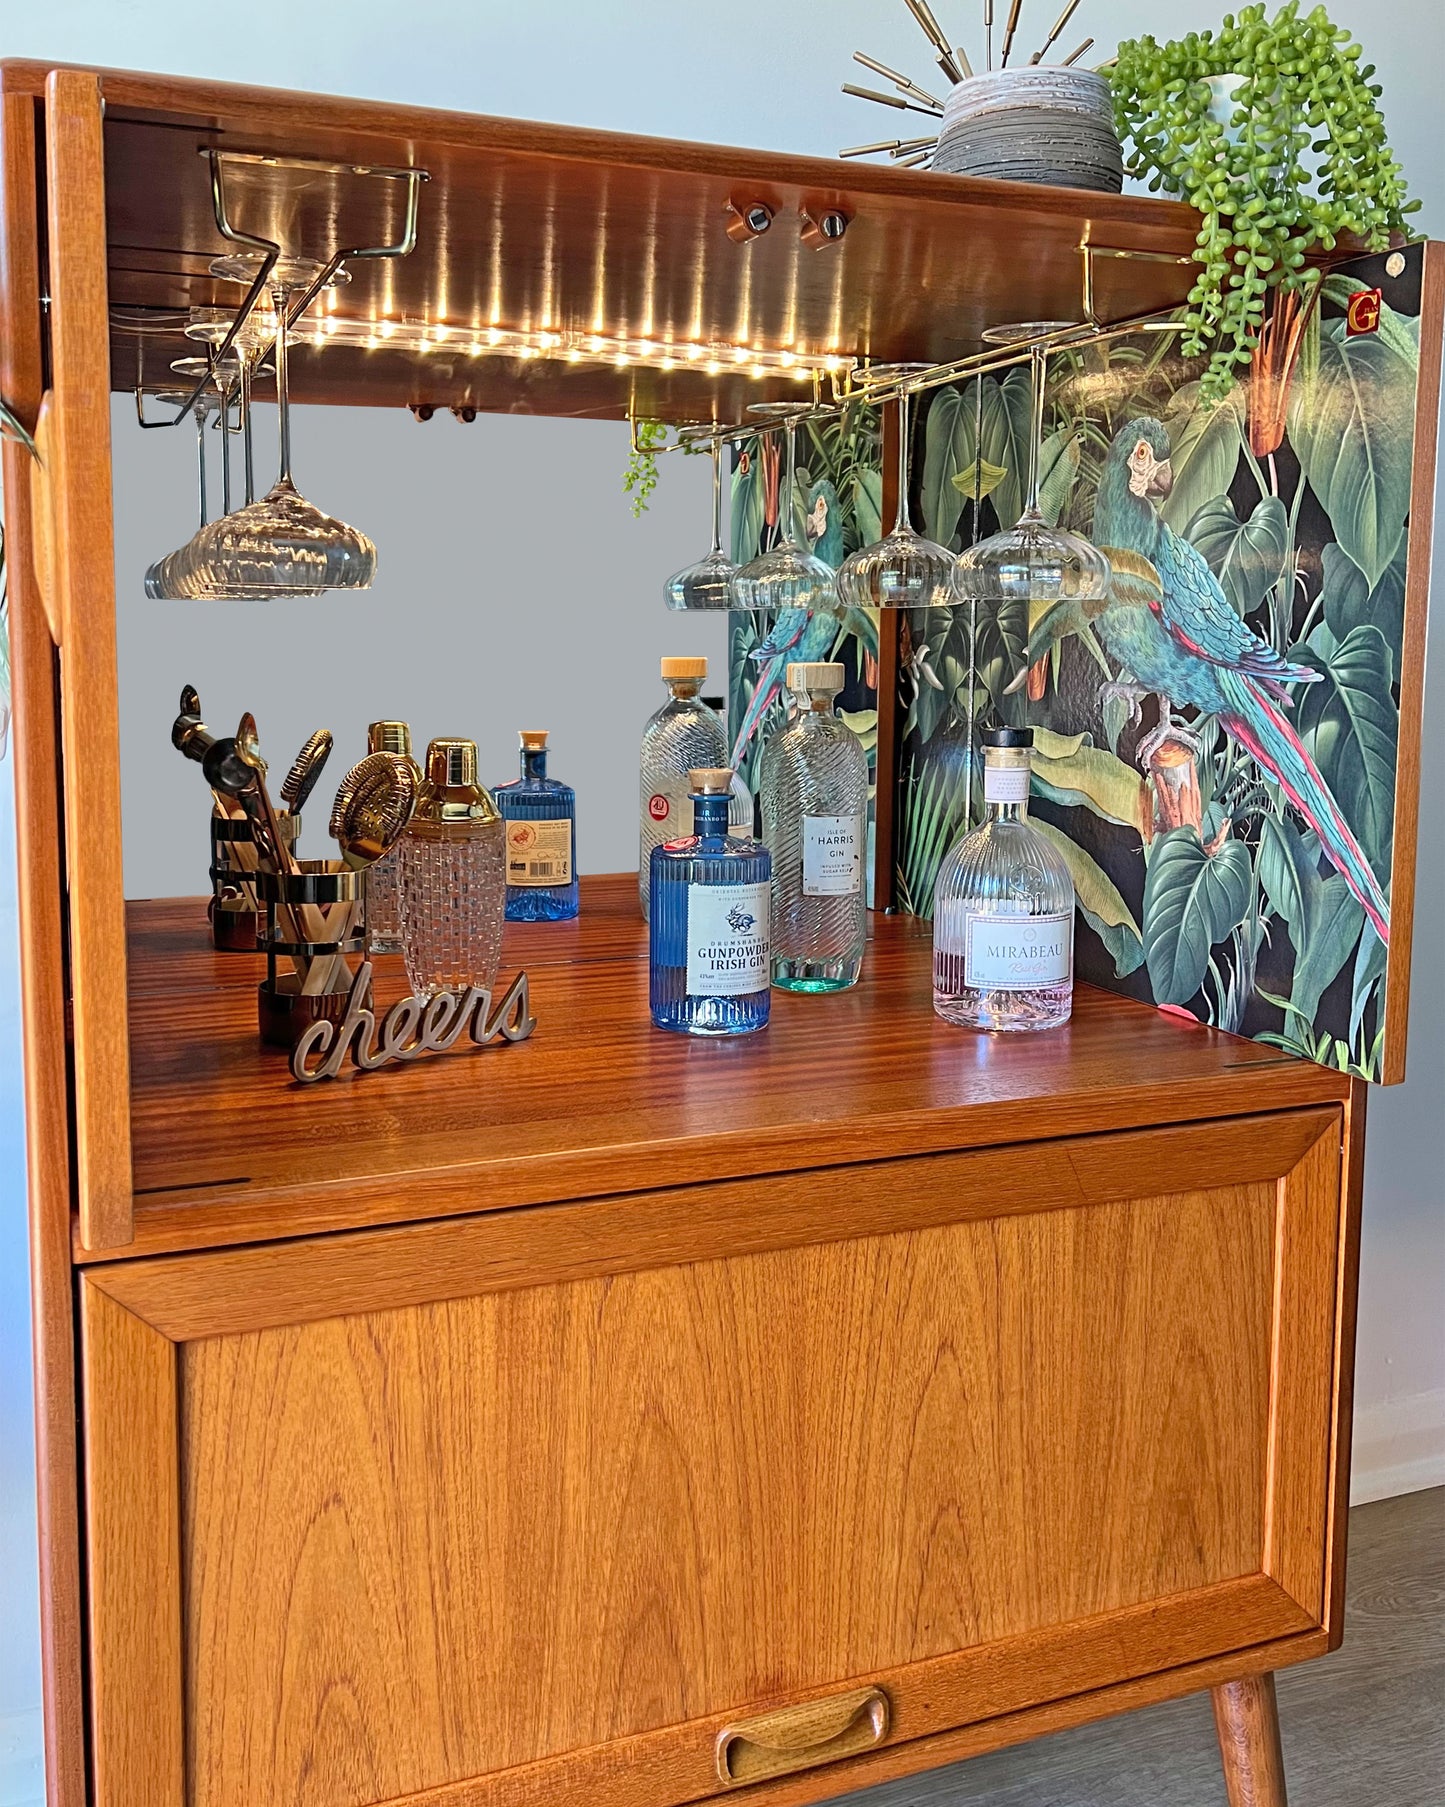 Vintage Mid Century G Plan Fresco Drinks Cocktail Cabinet on Wooden Legs - Tropical Parrot